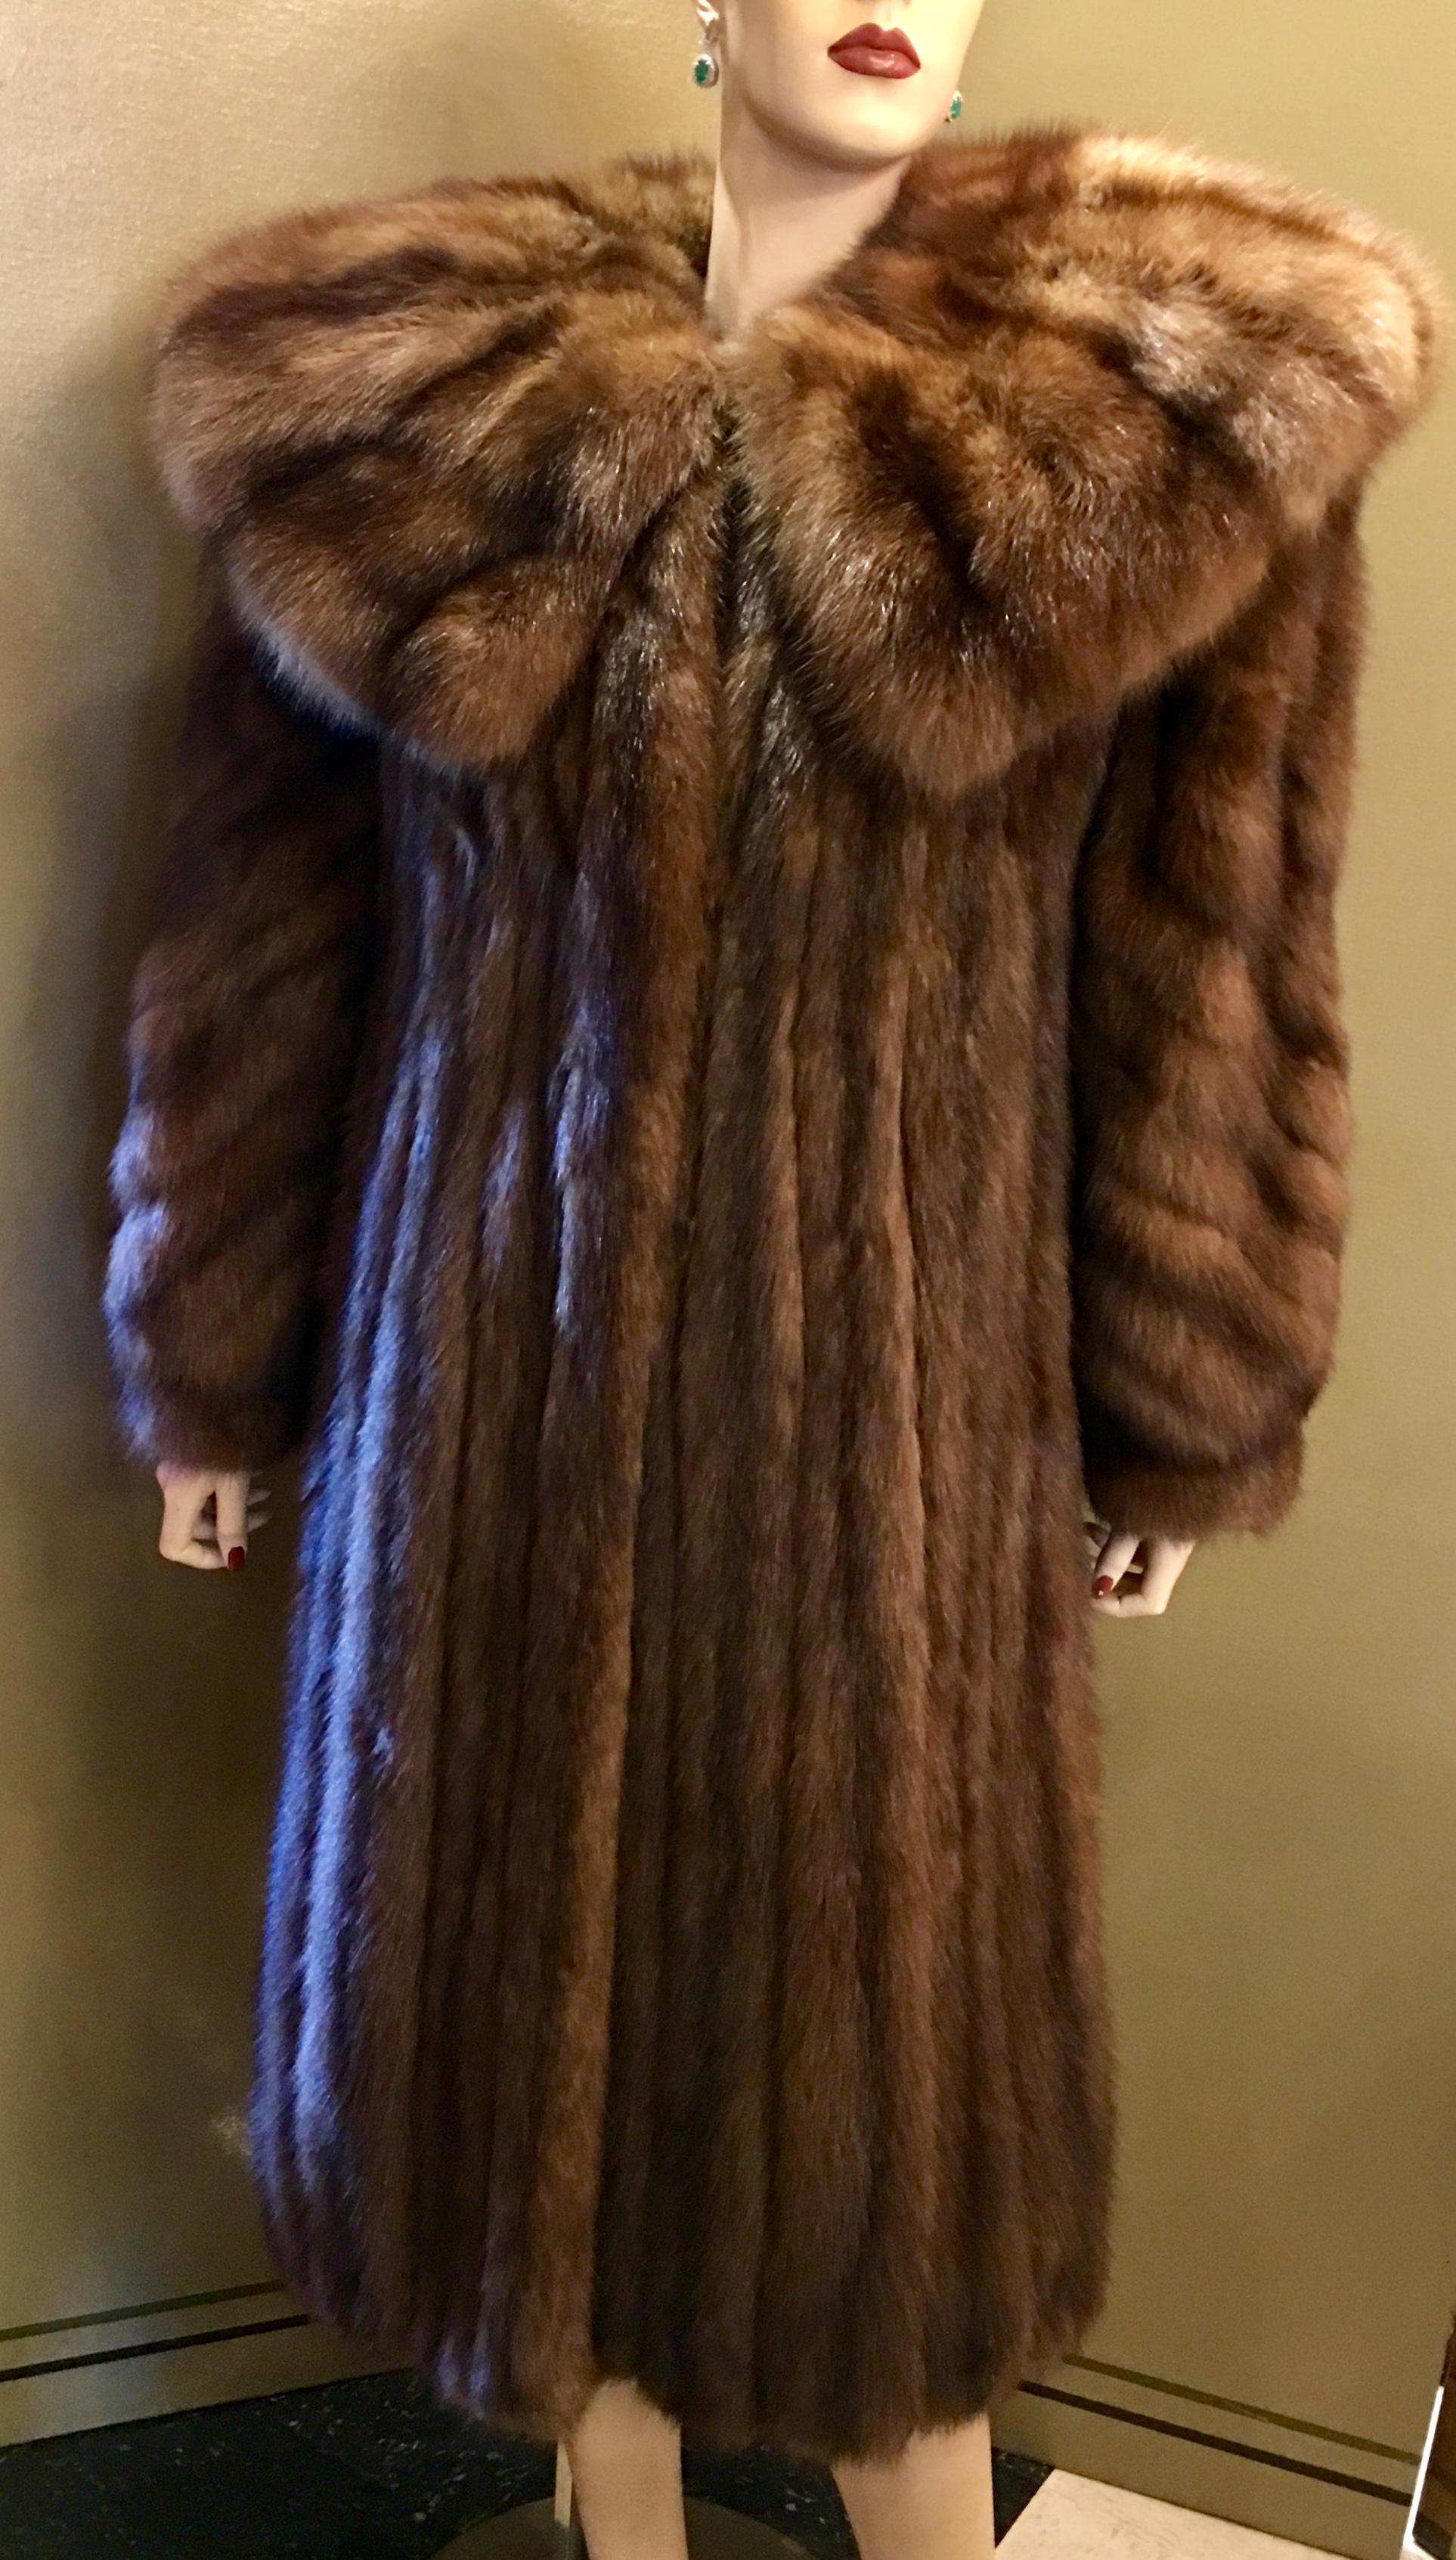 World’s Finest Russian Barguzin Imperial Sable Fur Coat - Fit for Royalty  2